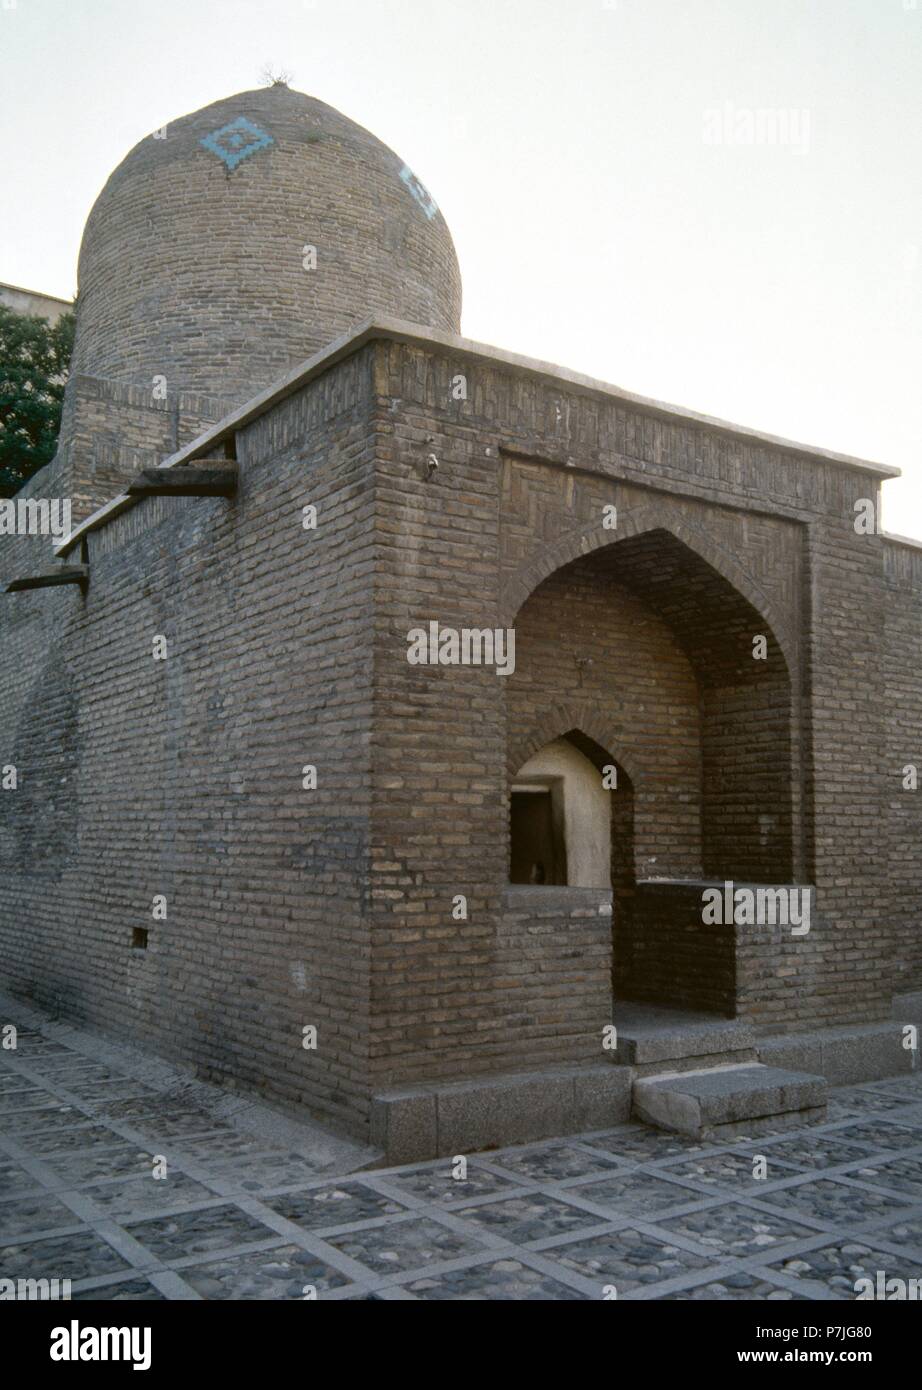 Tomb of Esther and Mardechai. Mausoleum. According to Stuart Brown, the site is more probably the sepulcher of Shushandukht, the Jewish consort of the Sasanian king Yazdegerd I (399-420 AD). Exterior. Hamadan, Iran. Stock Photo